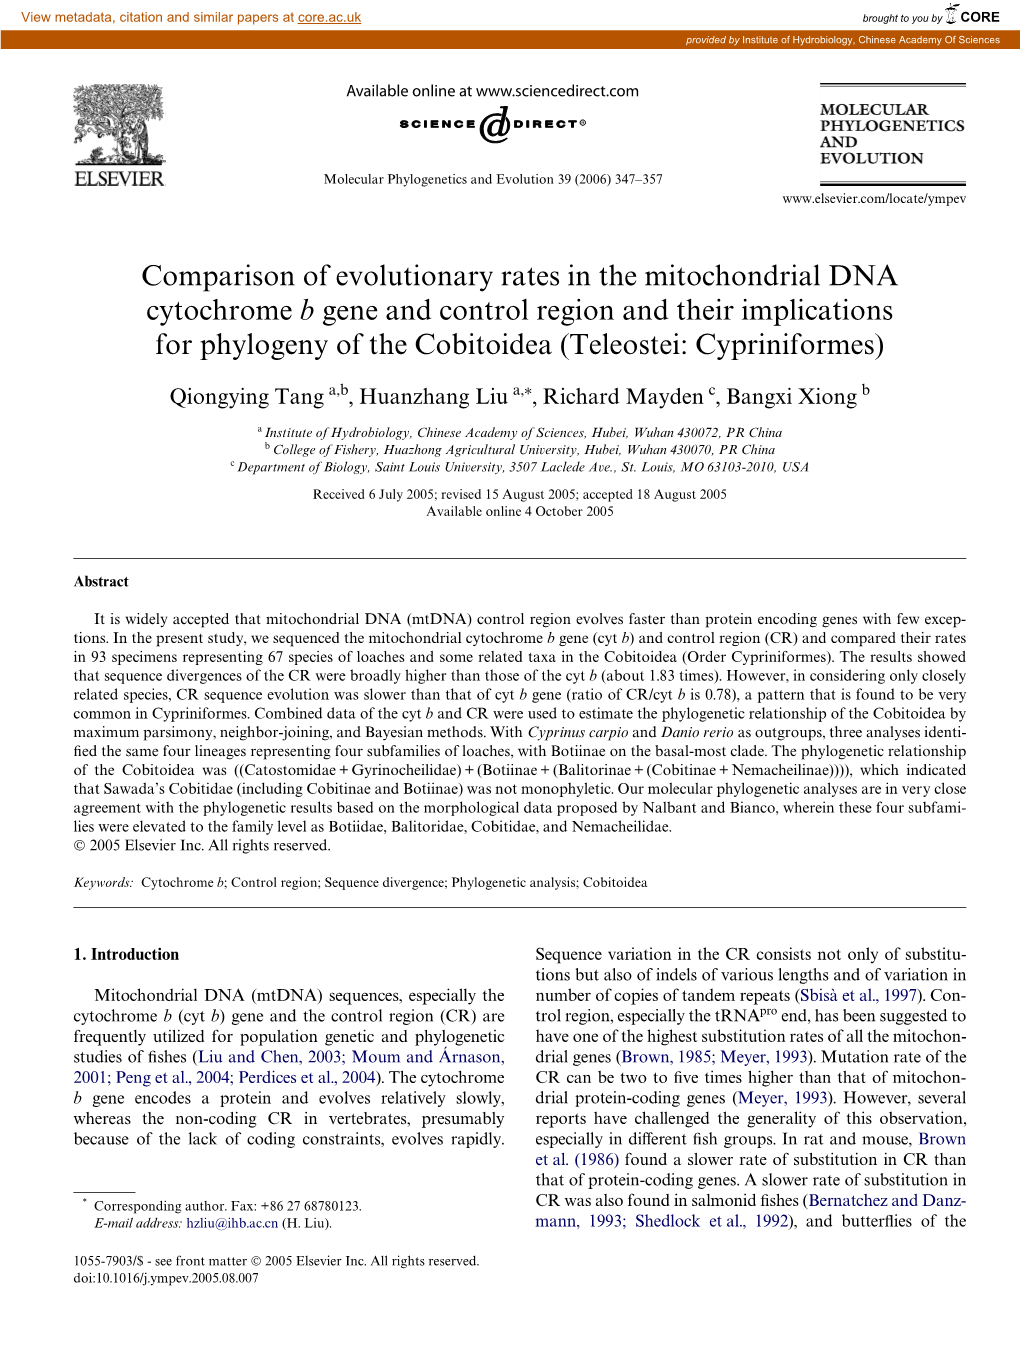 Comparison of Evolutionary Rates in the Mitochondrial DNA Cytochrome B Gene and Control Region and Their Implications for Phylog